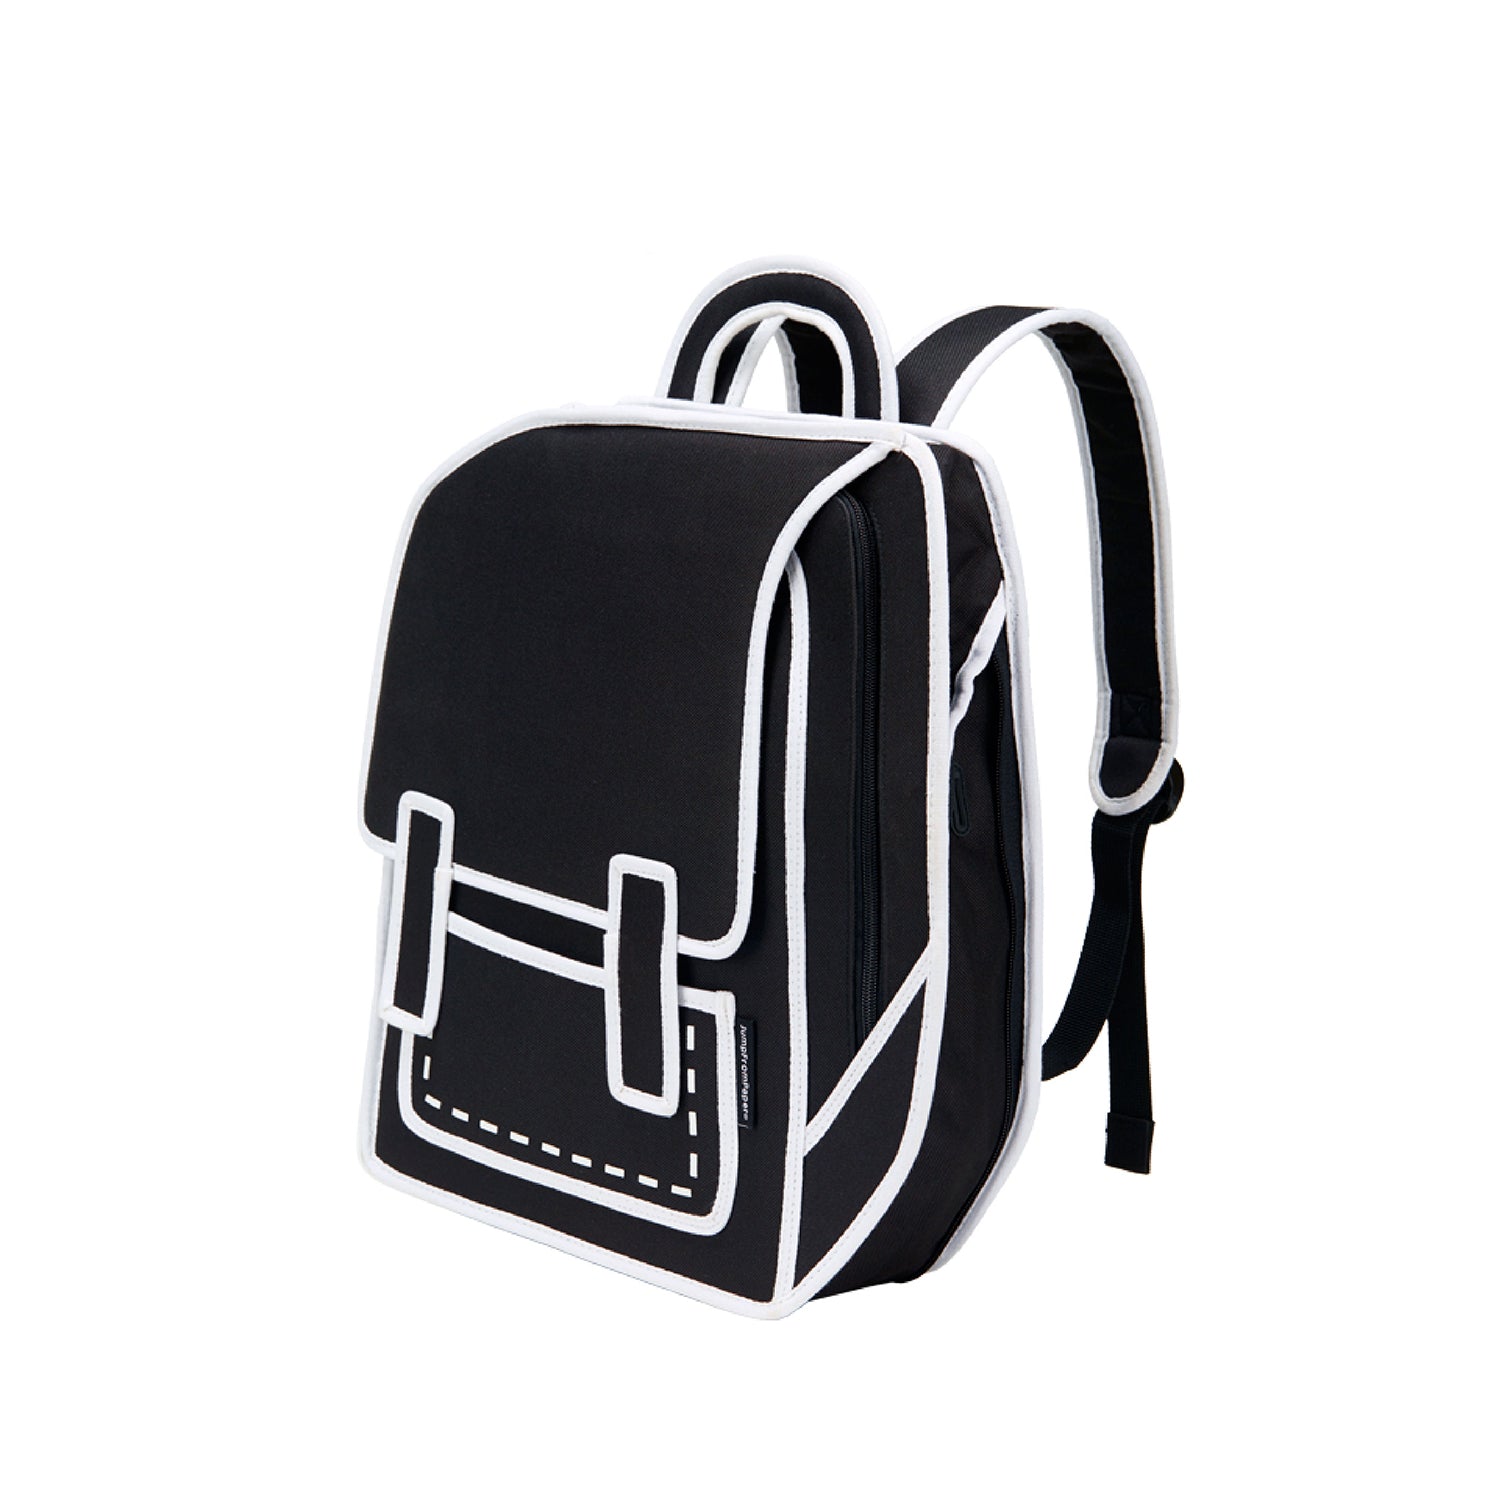 backpack clipart black and white